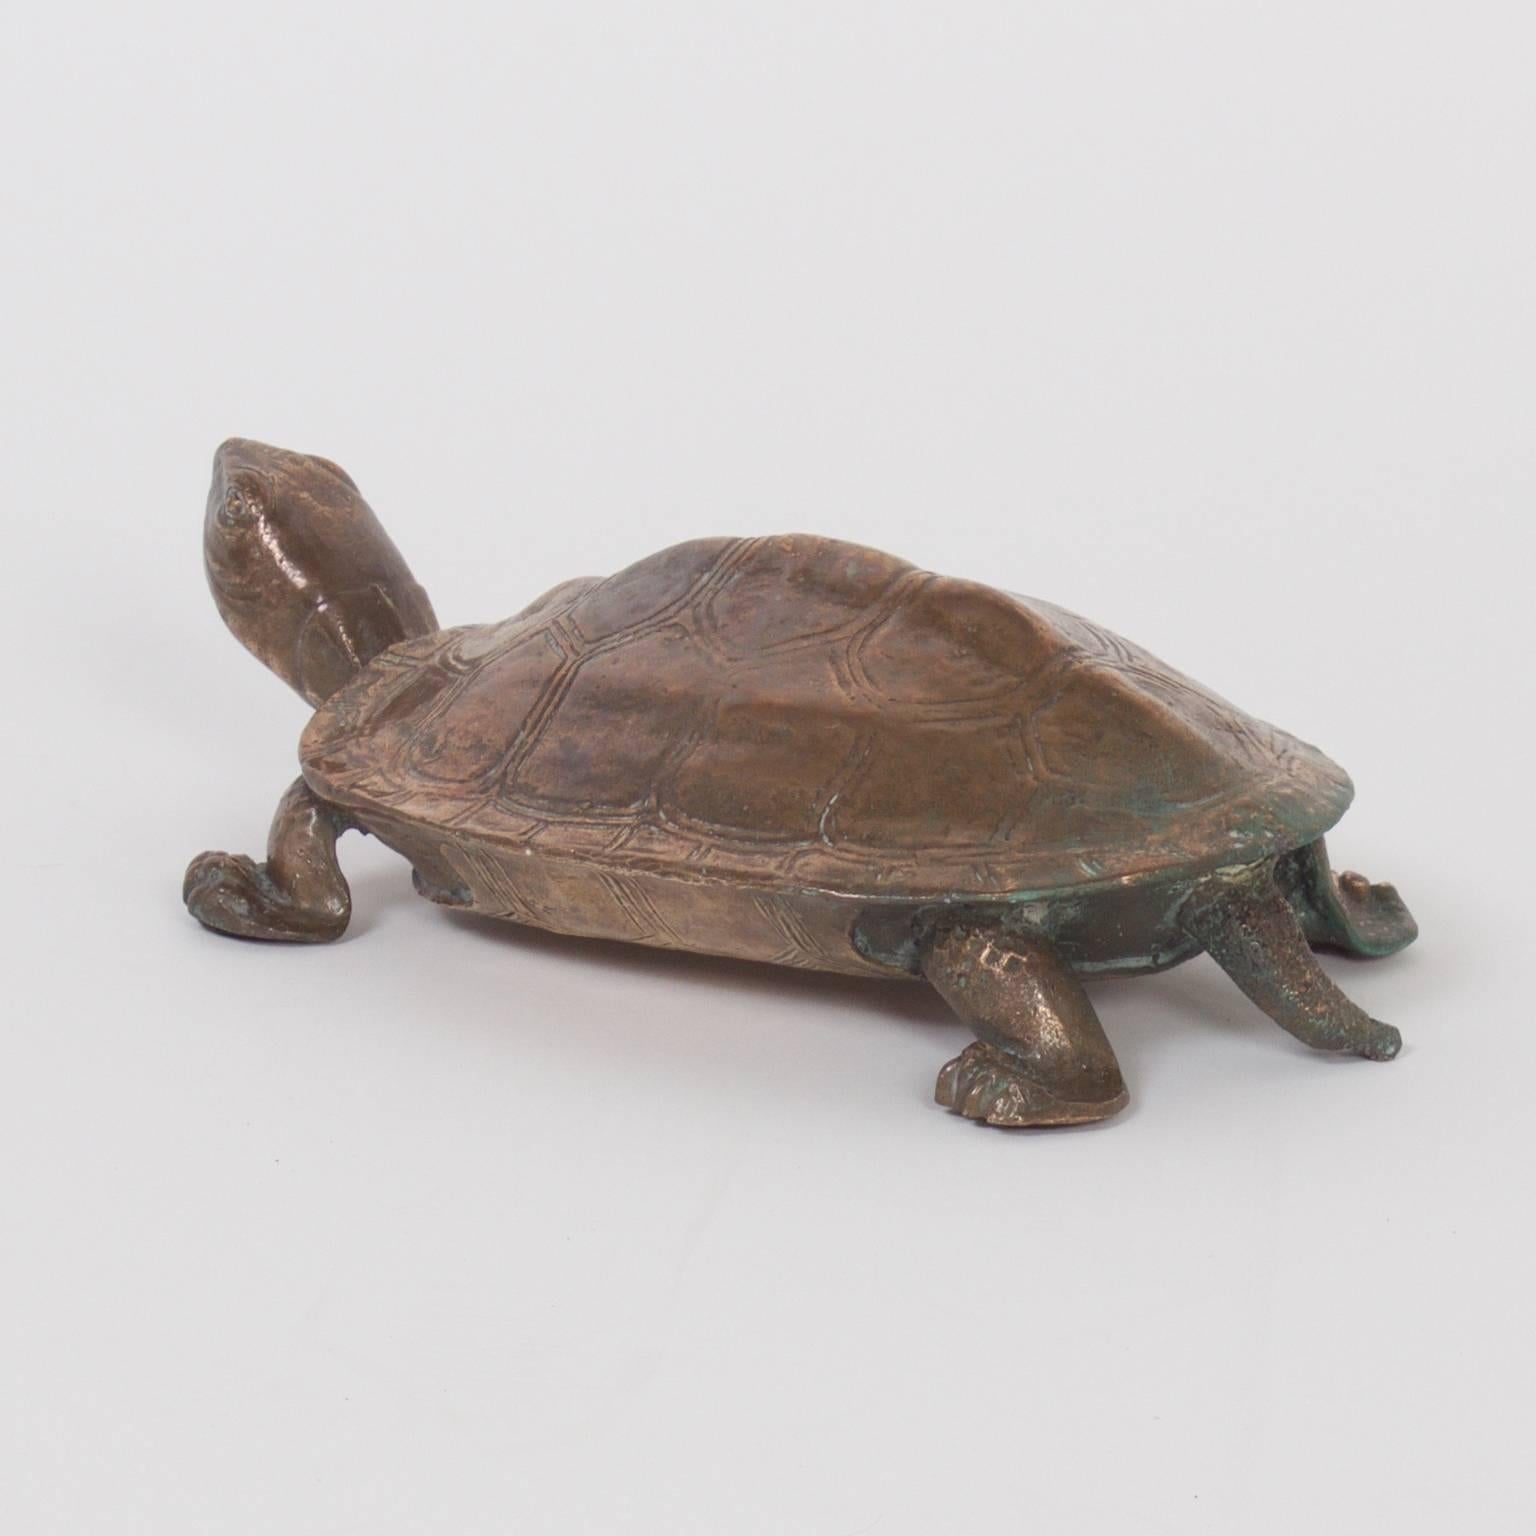 The turtle, long a subject of fascination, is presented here cast in bronze with a mellow luster and slight verdigris finish. Rustic details on the top and bottom.